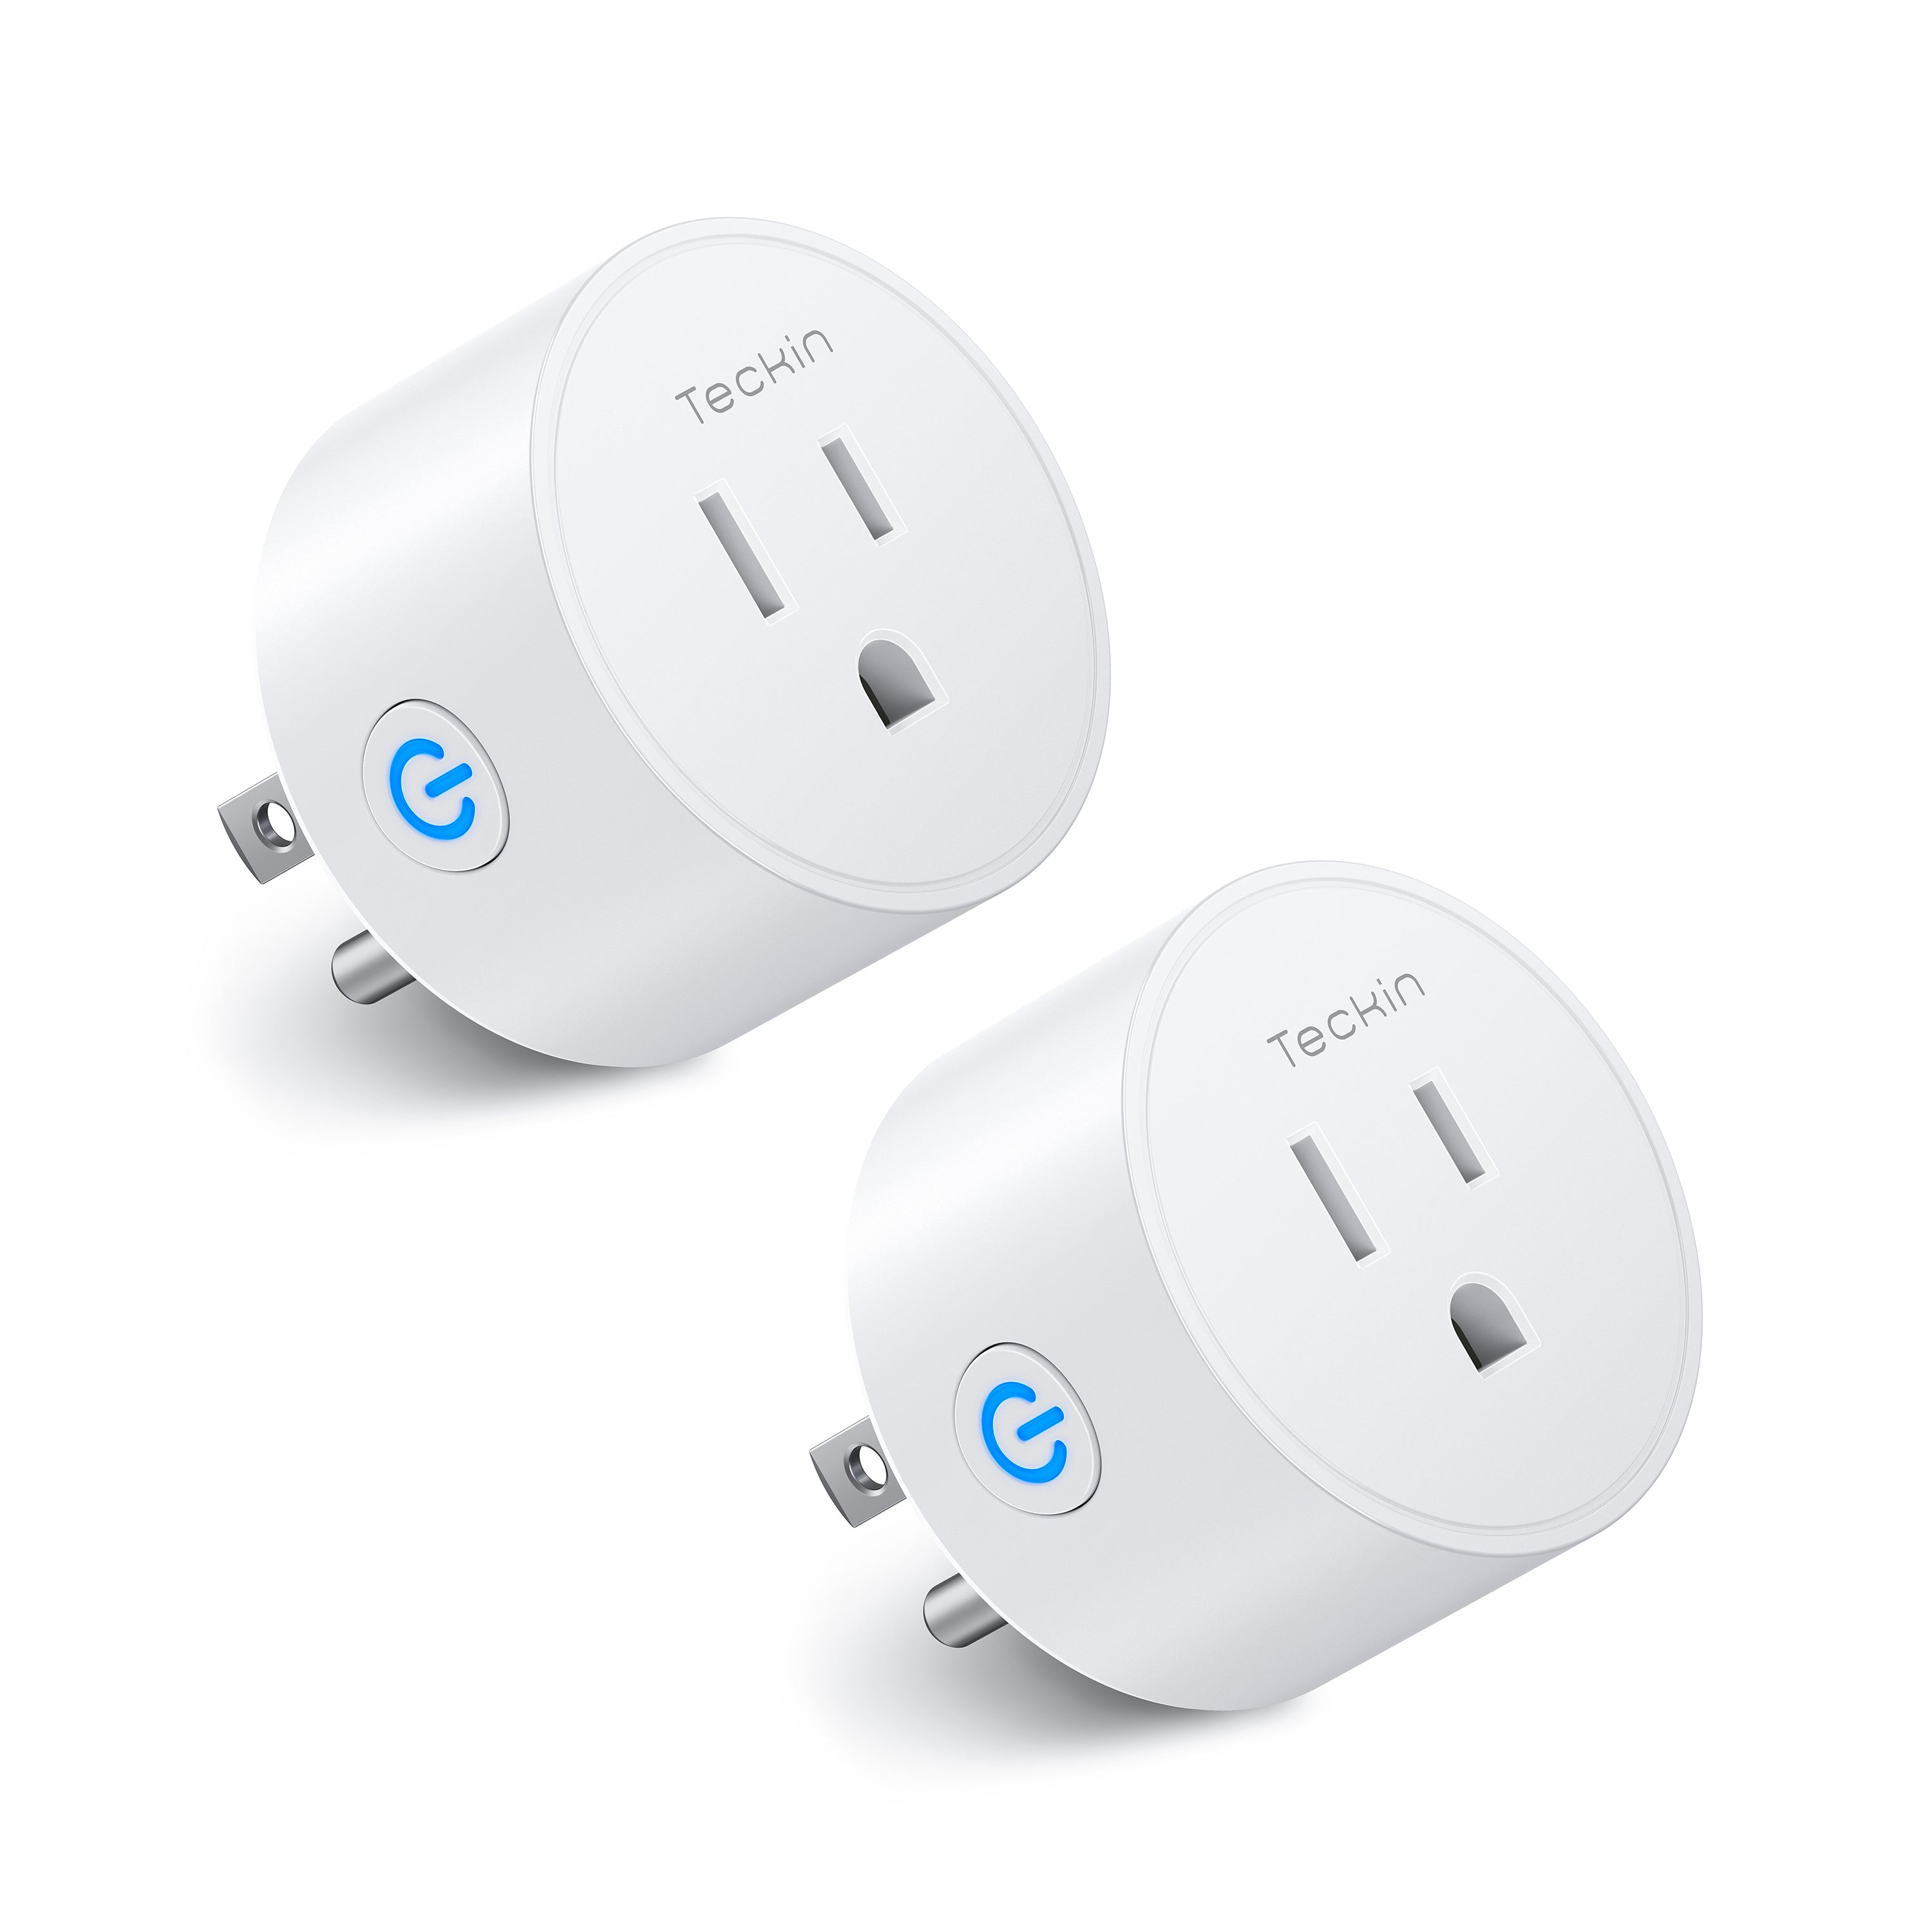 WHOLESALE Teckin SP10 WiFi Smart Plug with Timer Function